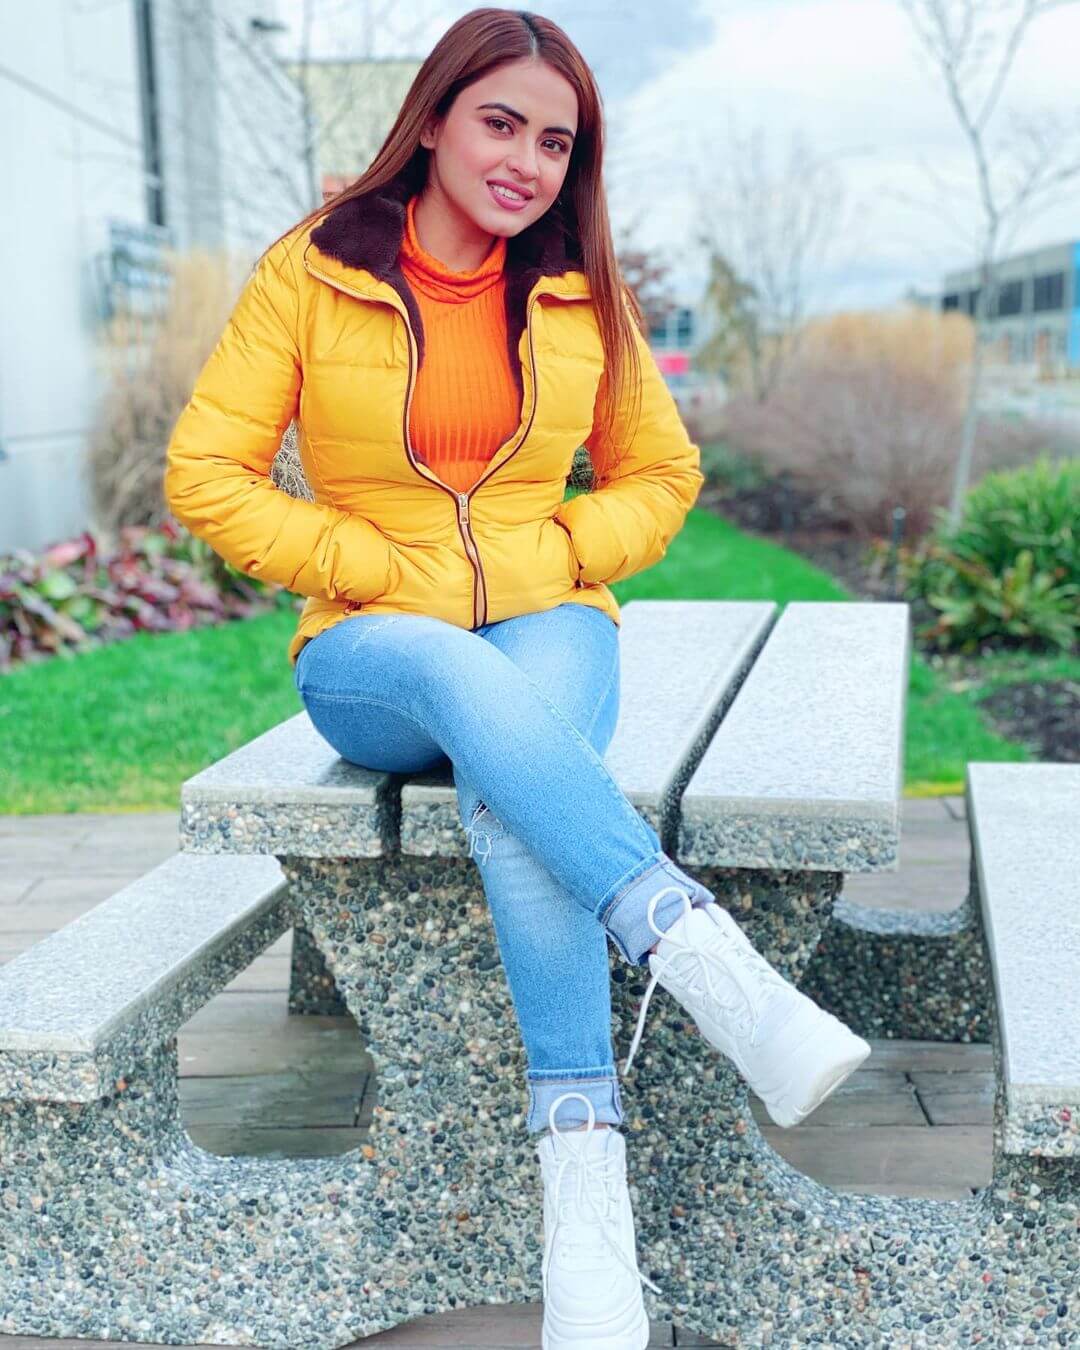 Simi Chahal Casual Look In Blue Denim Jeans With Yellow Jacket Outfit Simi Chahal Outfit &amp; Looks Inspo